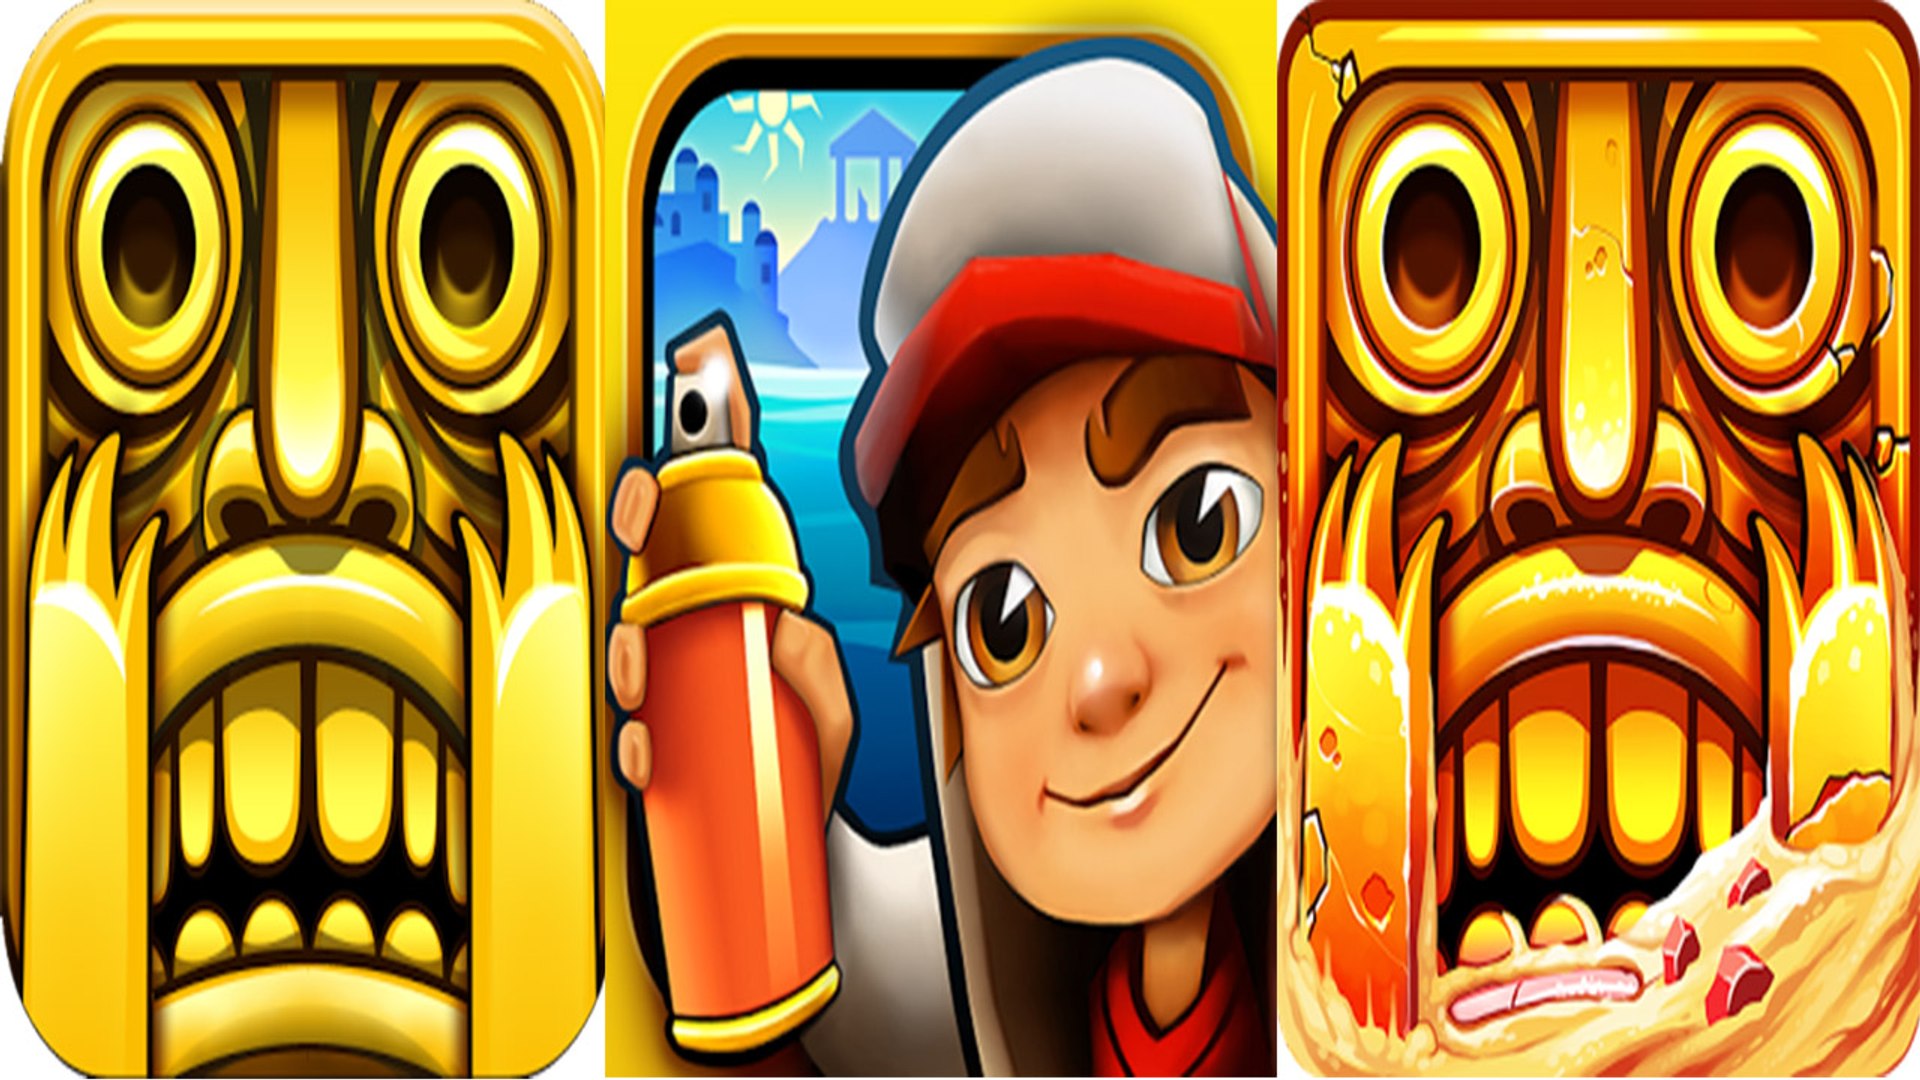 Video Subway Surfers Zurich VS Temple Run 2: Version Chinese :)﻿ - video  Dailymotion